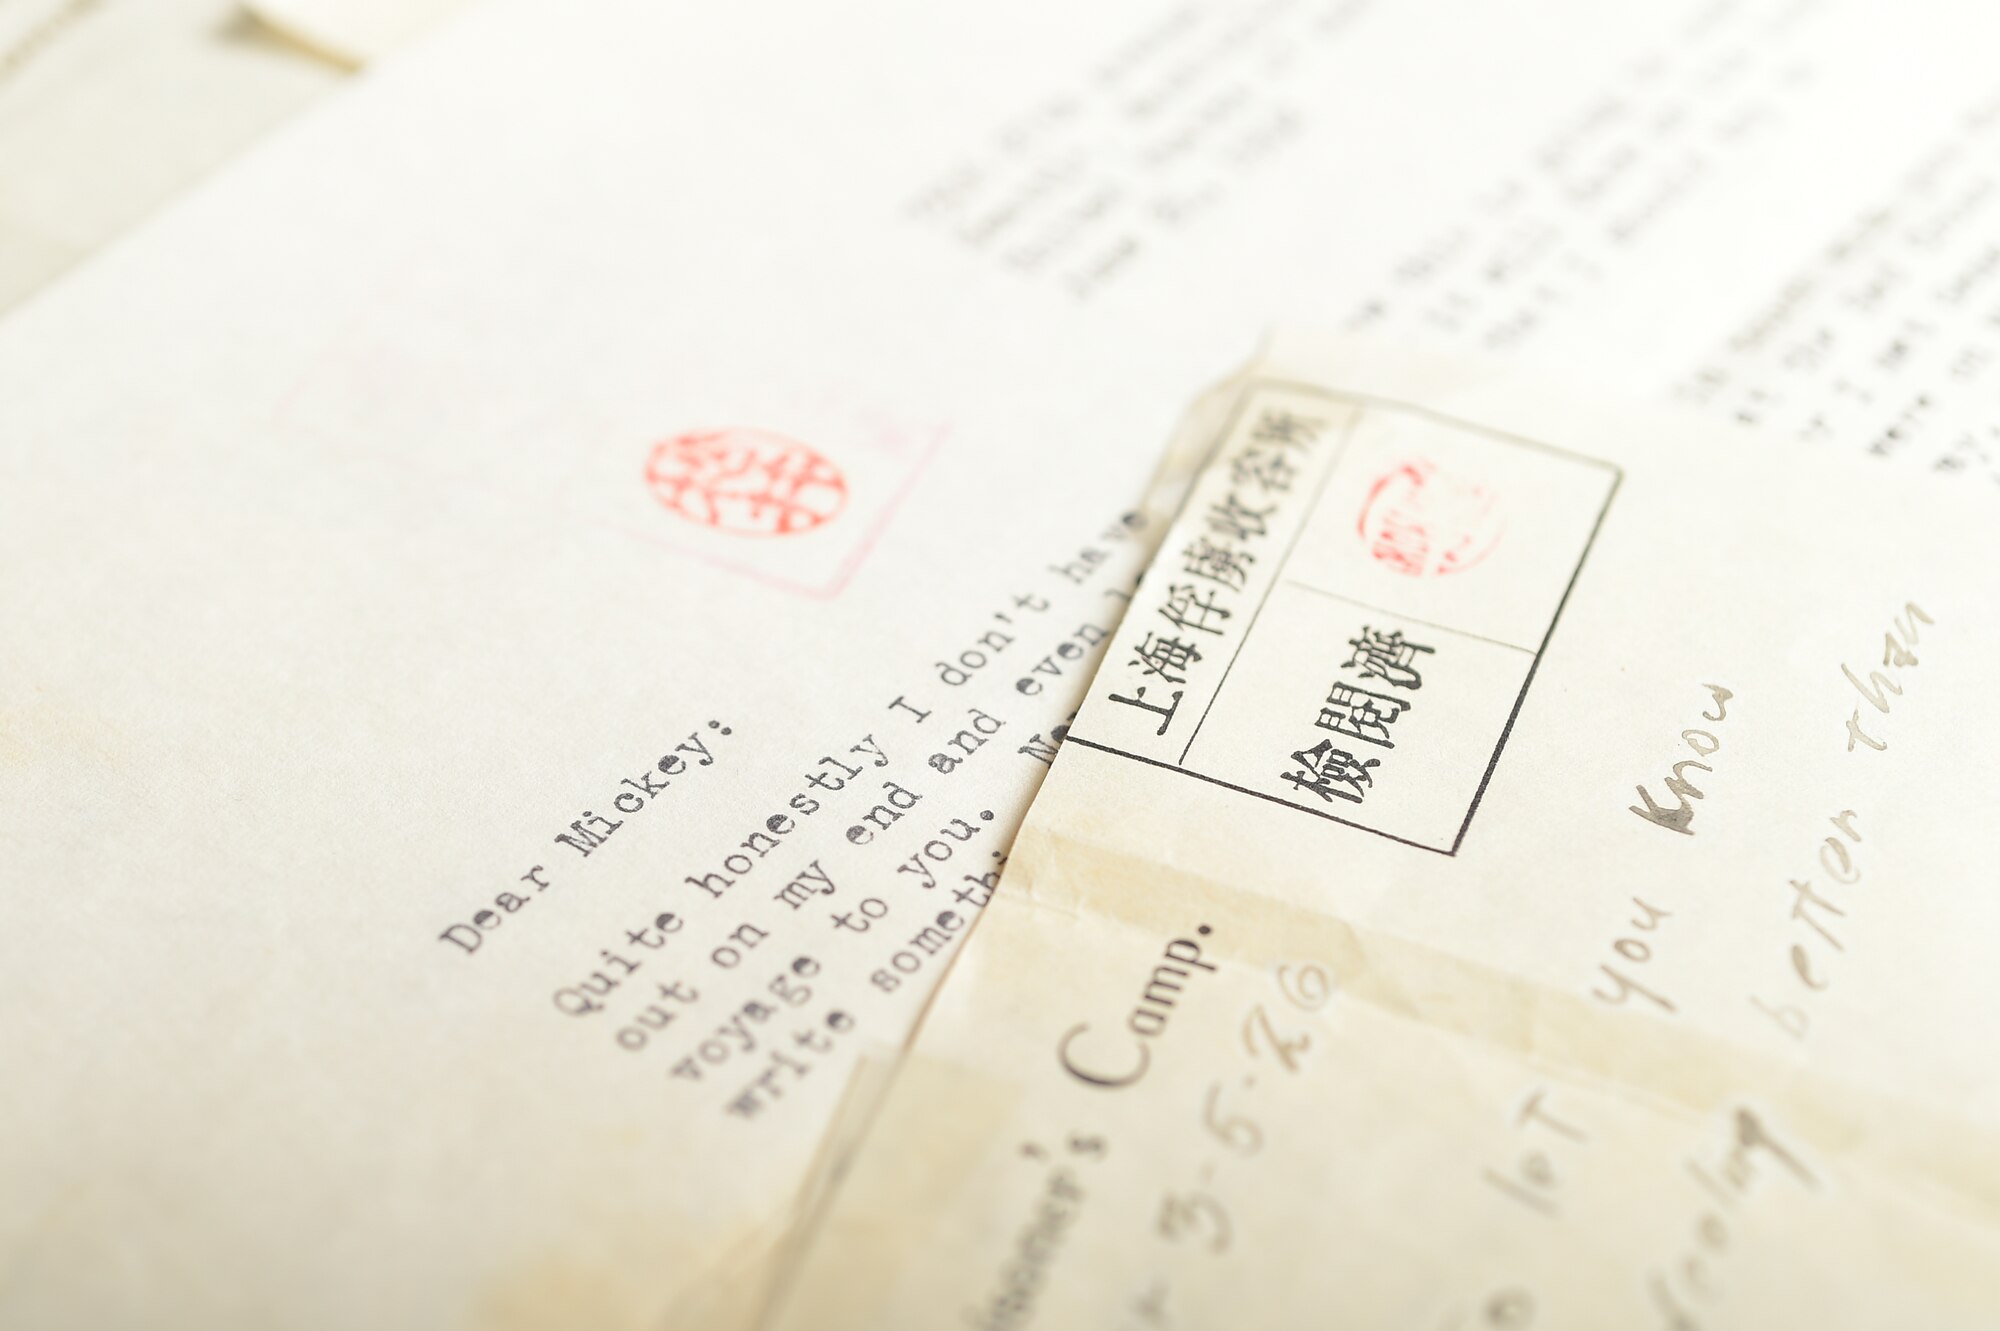 Letters sent between Malcolm Johnson, World War II veteran and former prisoner of war, and his family are shown at Davis-Monthan Air Force Base, Ariz., Aug. 26, 2015. Johnson was able to write his first letter home nearly five months after he was captured by Japanese forces. (U.S. Air Force photo by Airman 1st Mya M. Crosby/Released)